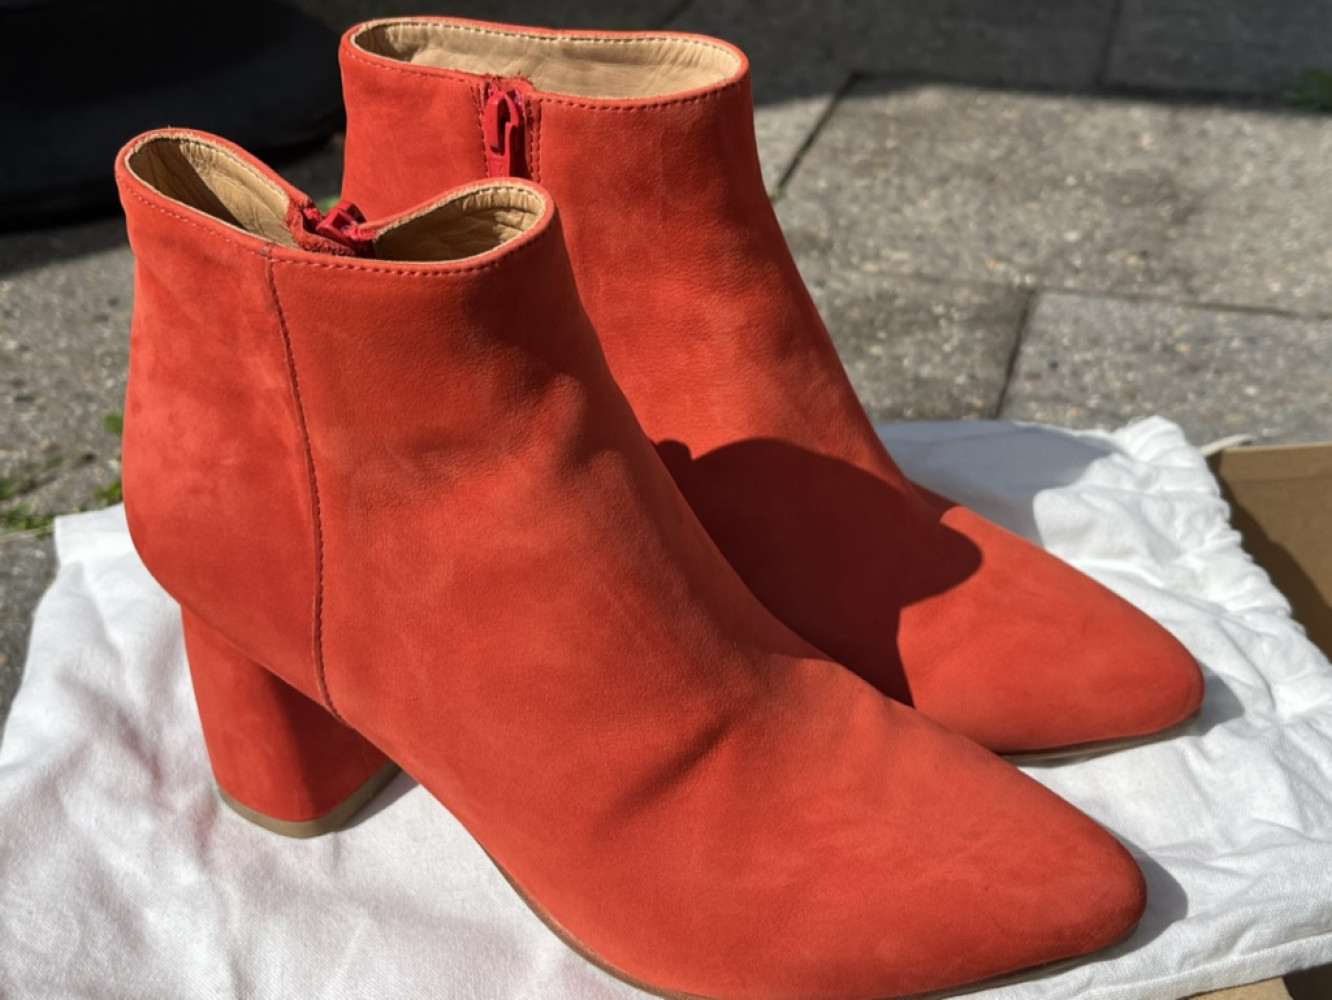 RED ORANGE SUEDE BOOTS SIZE 37 BRAND NEW